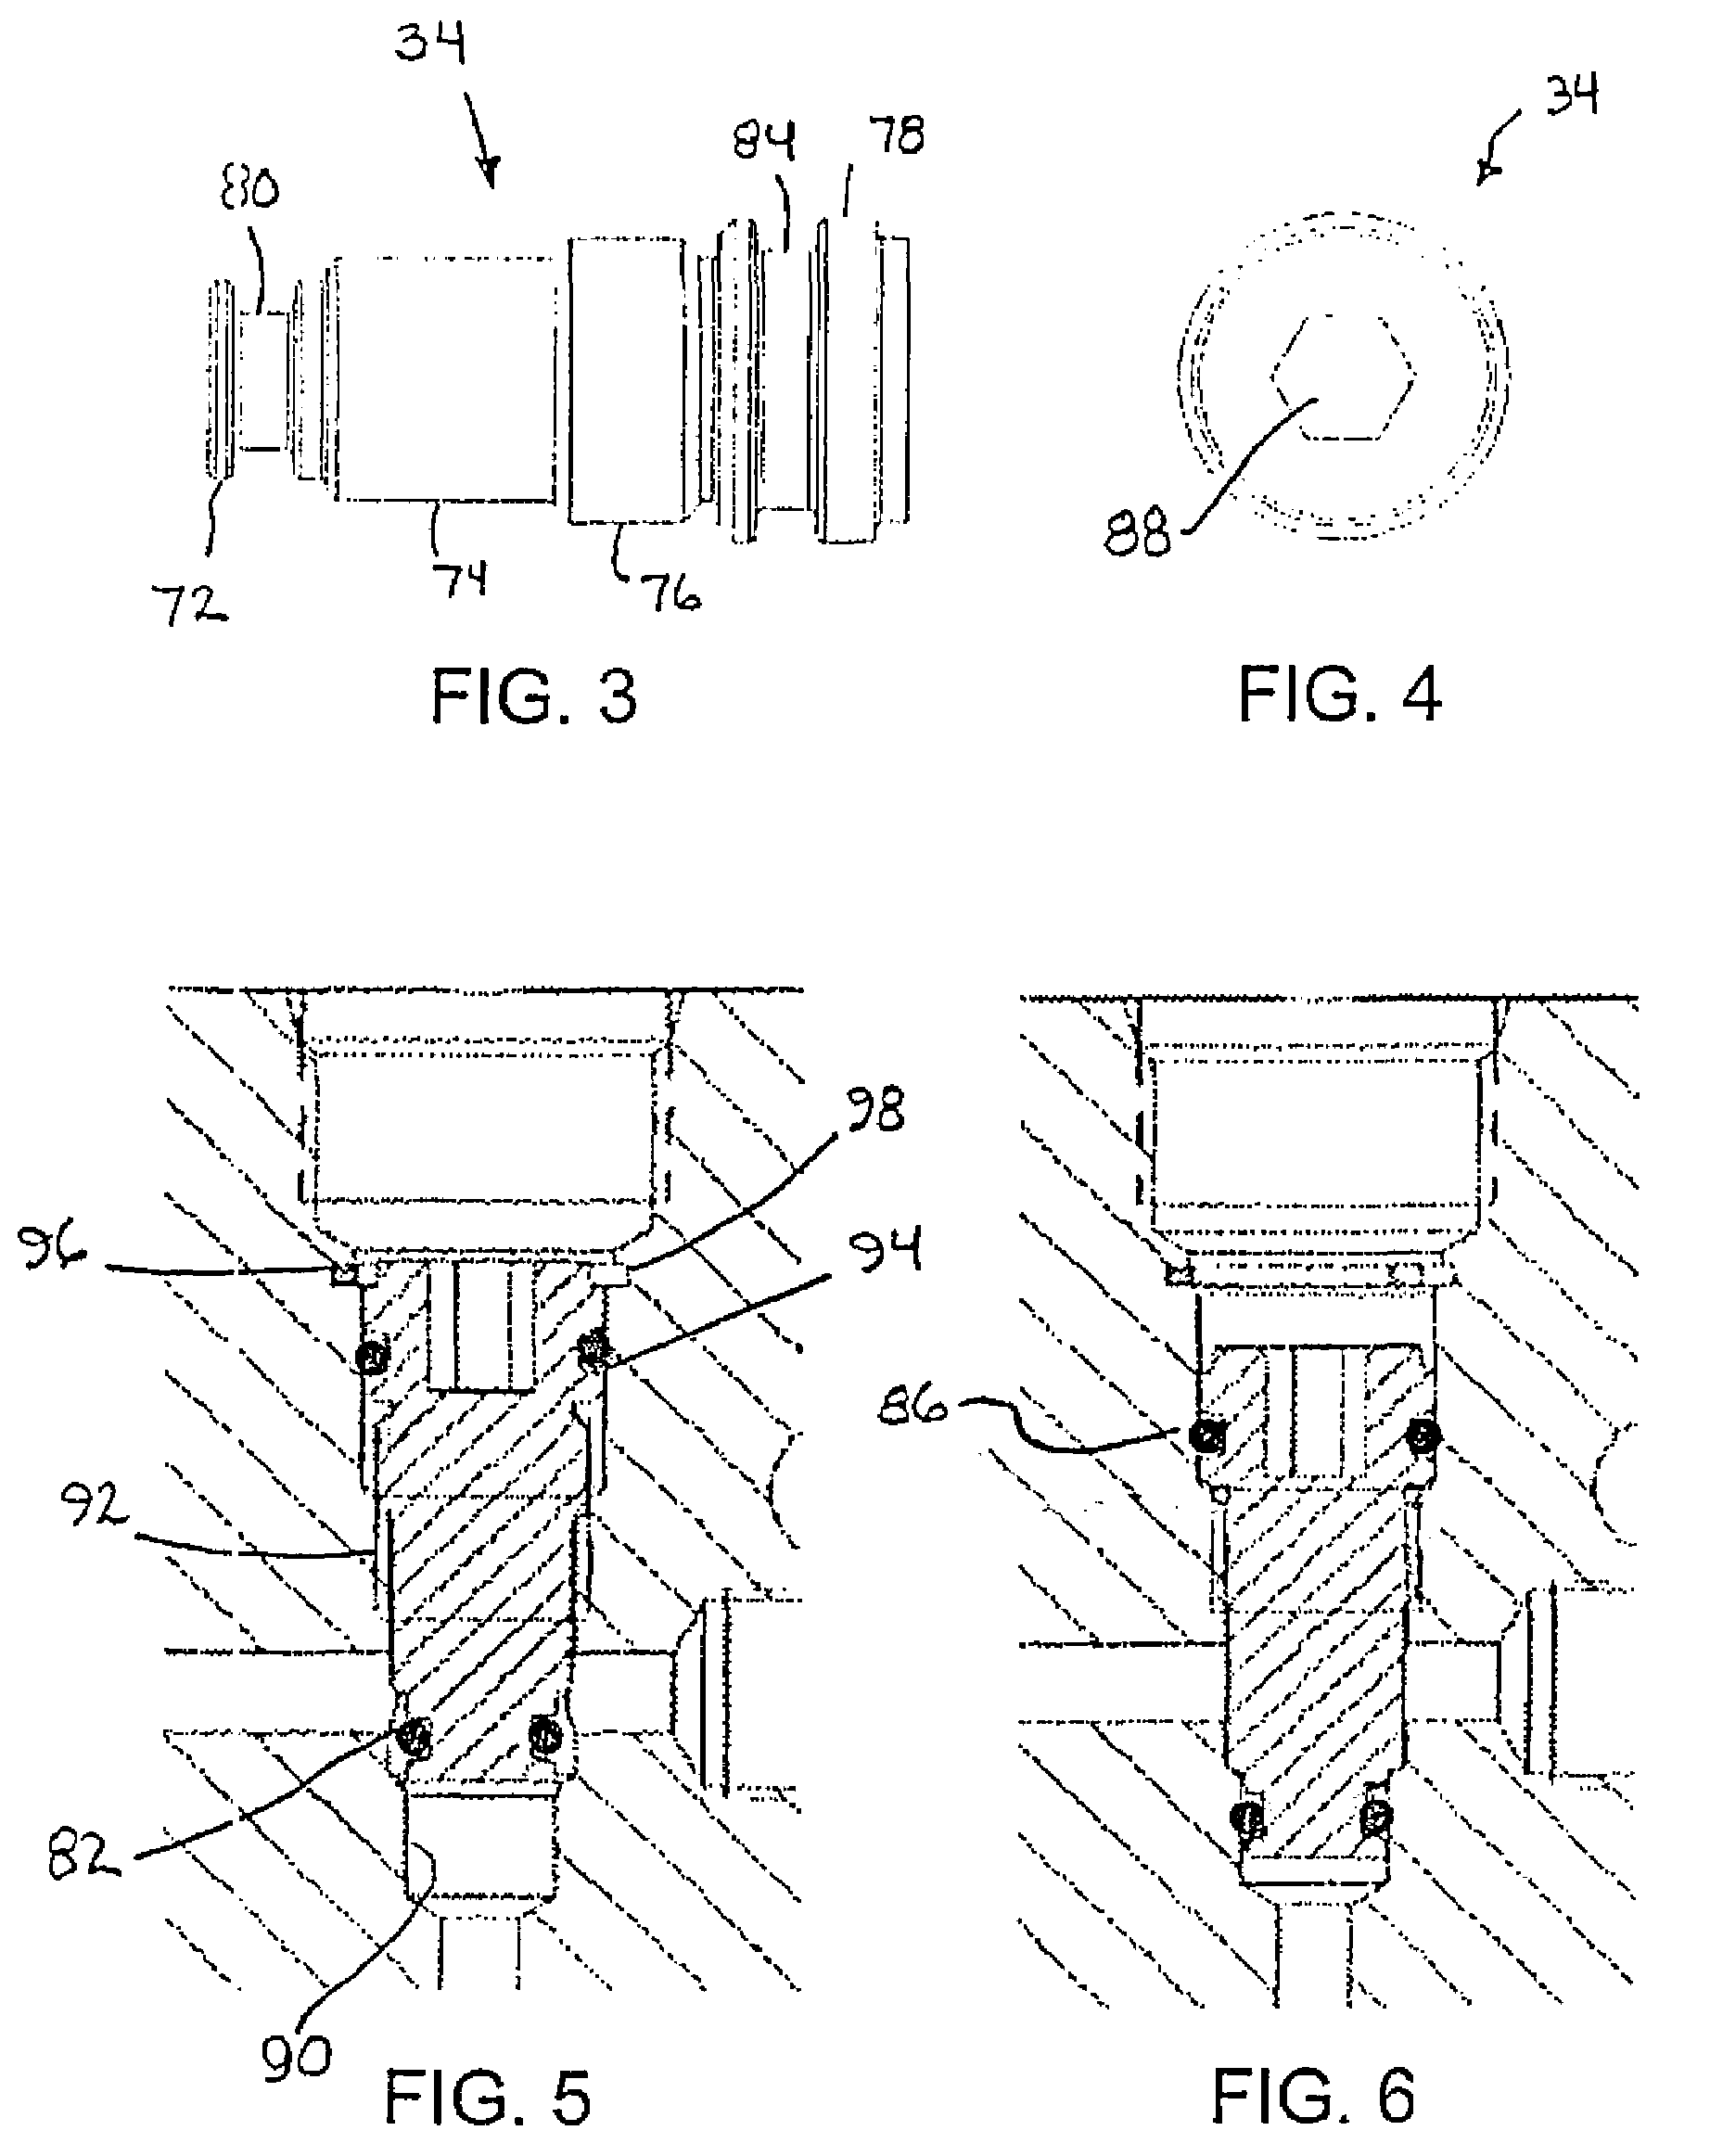 Hydraulic release system with manually operated hydraulic lock valve for spring-applied, hydraulically-released parking brake system